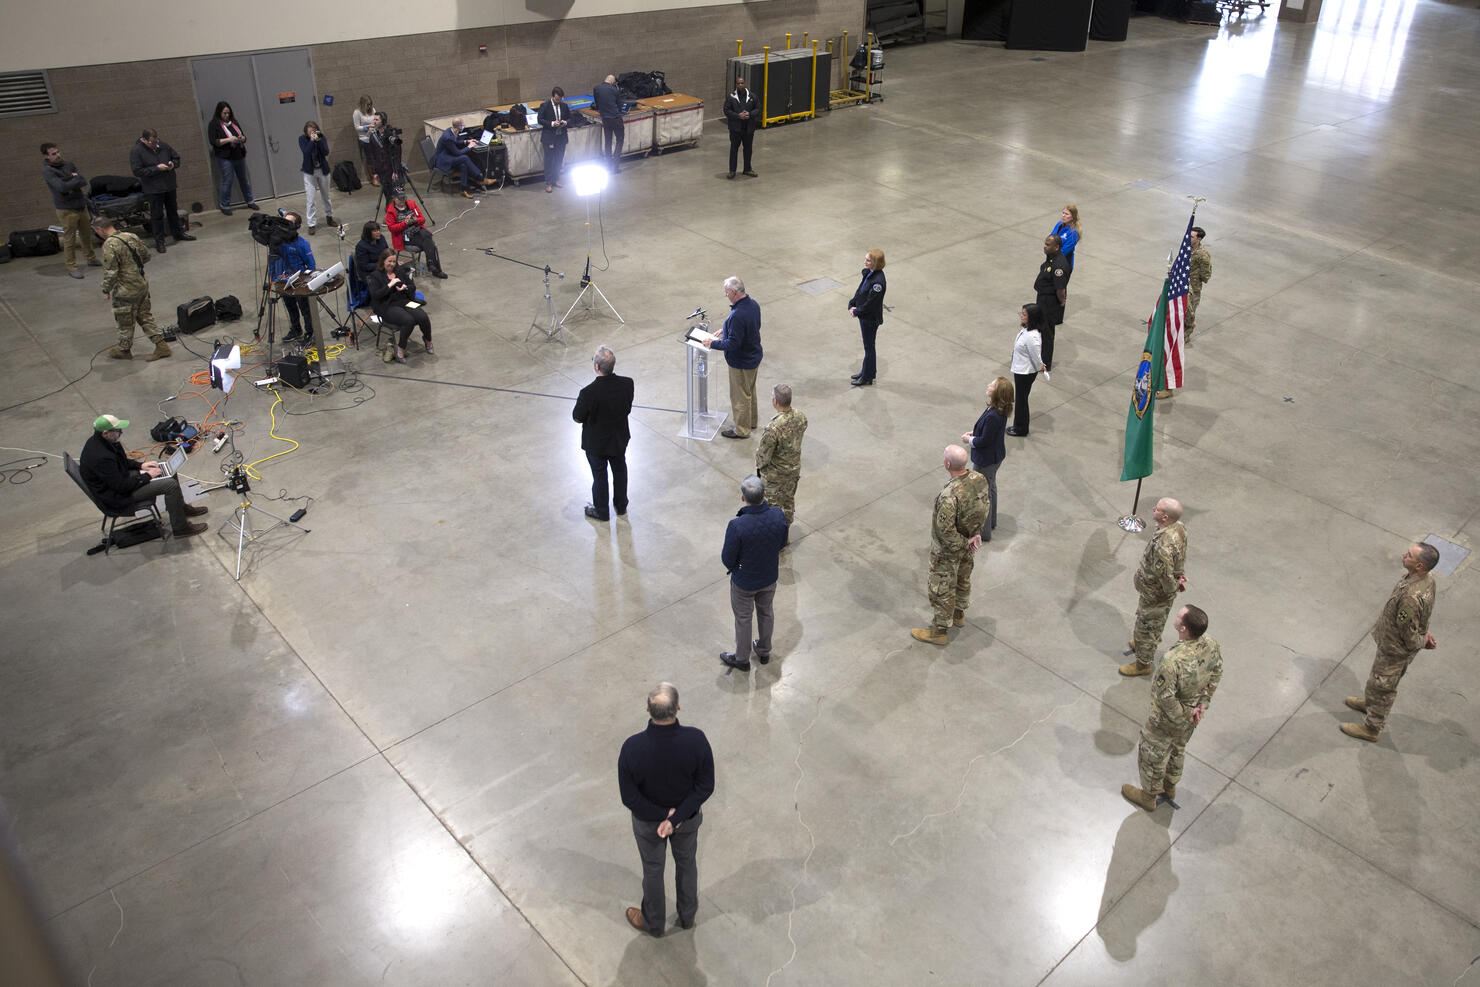 New Army Field Hospital Deployed At CenturyLink Field Event Center In Seattle